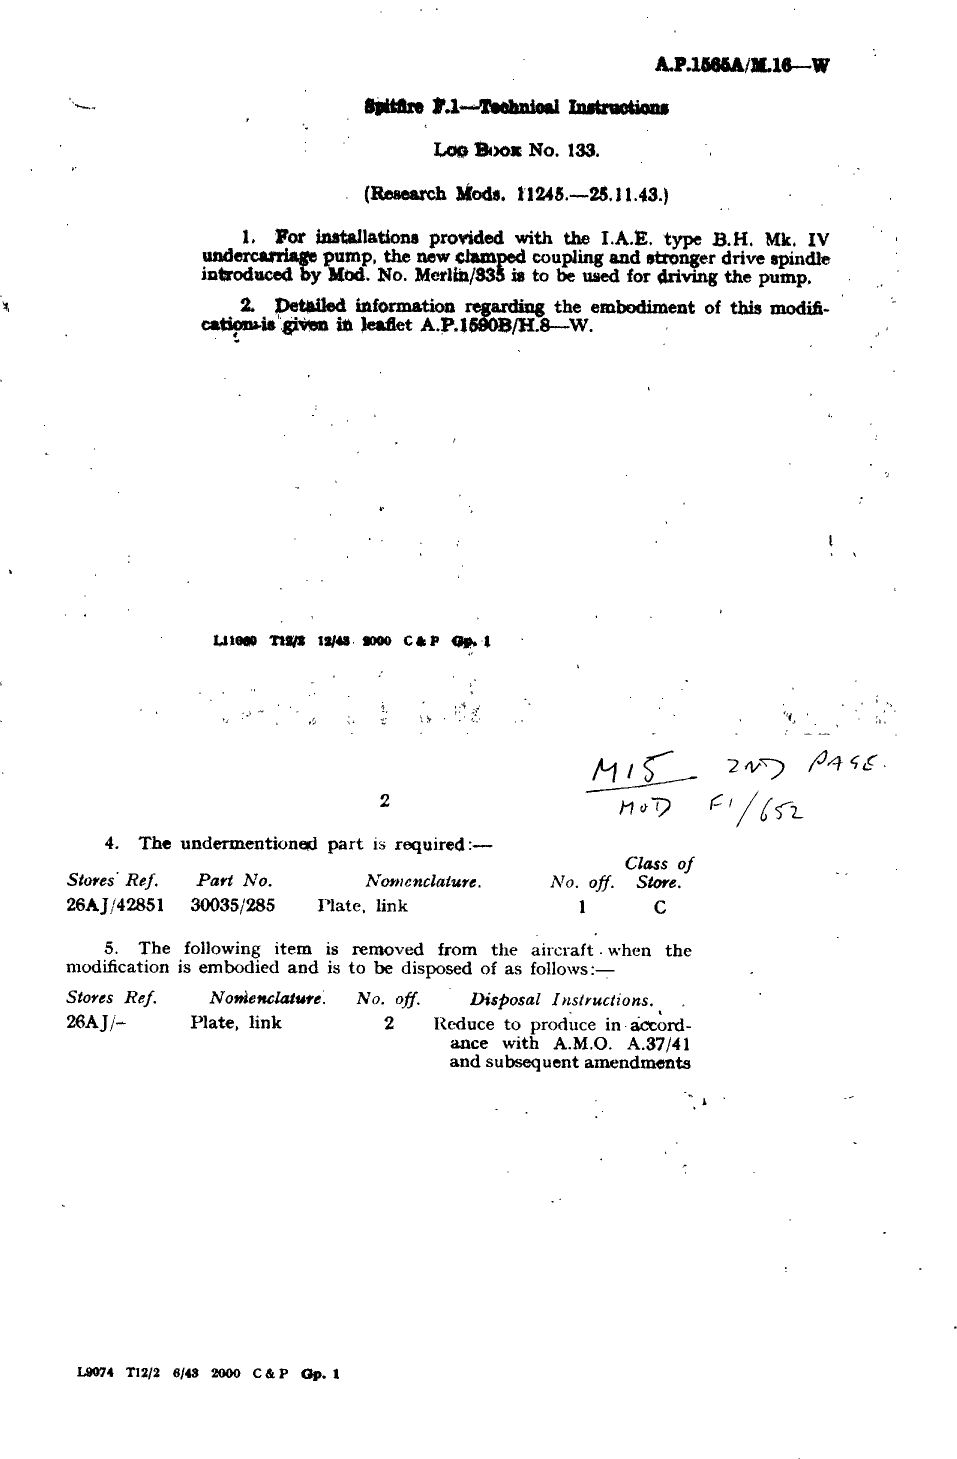 Sample page 1 from AirCorps Library document: Spitfire F.I Technical Instructions